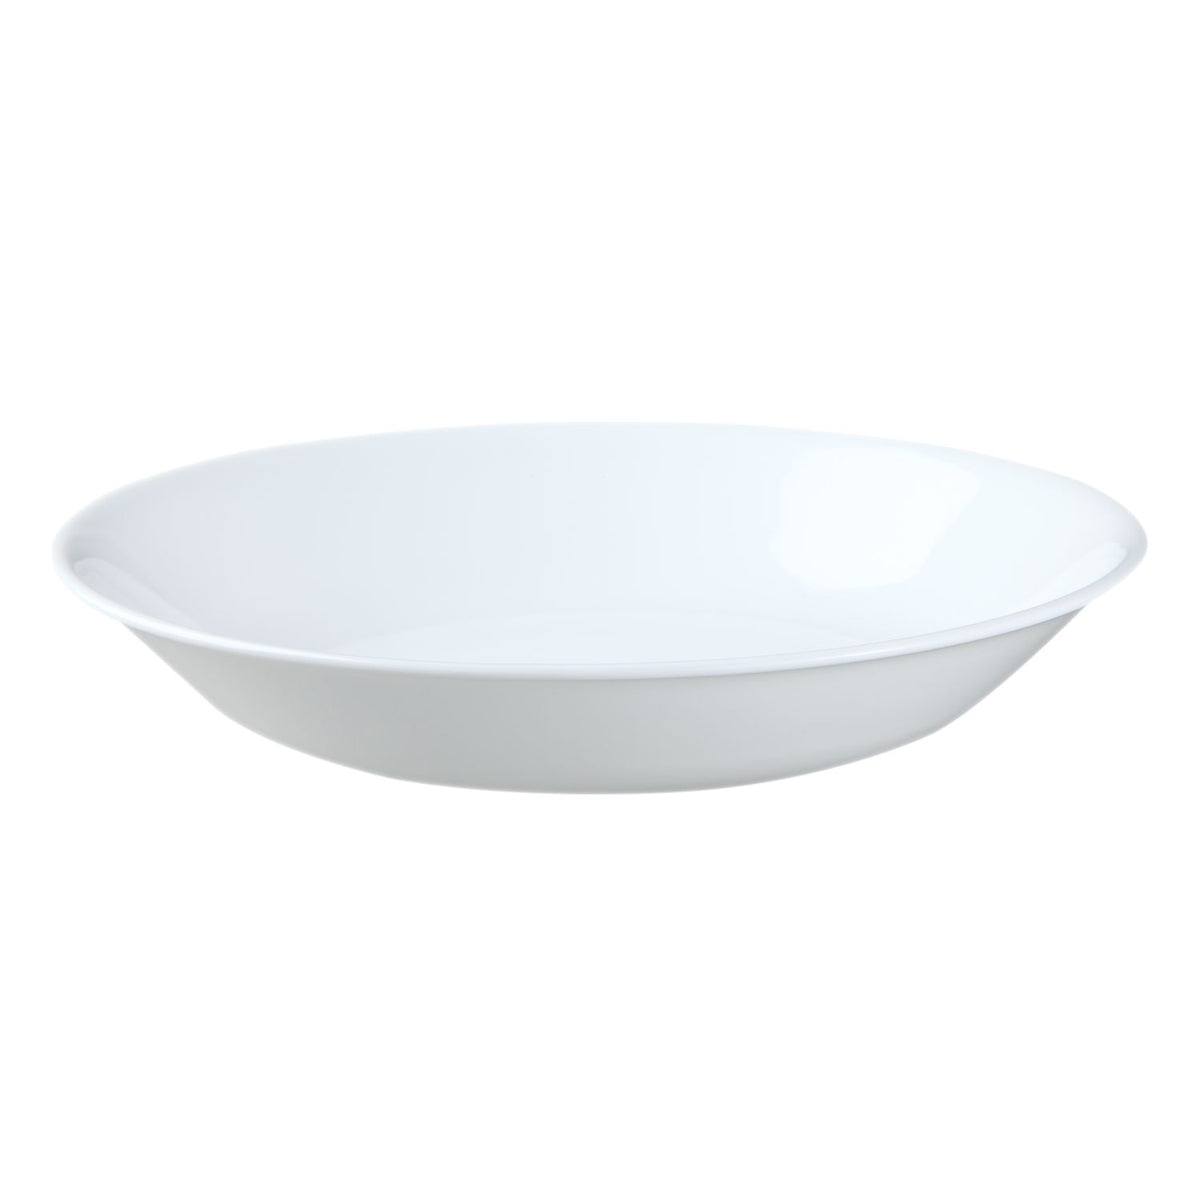 buy tabletop serveware at cheap rate in bulk. wholesale & retail professional kitchen tools store.